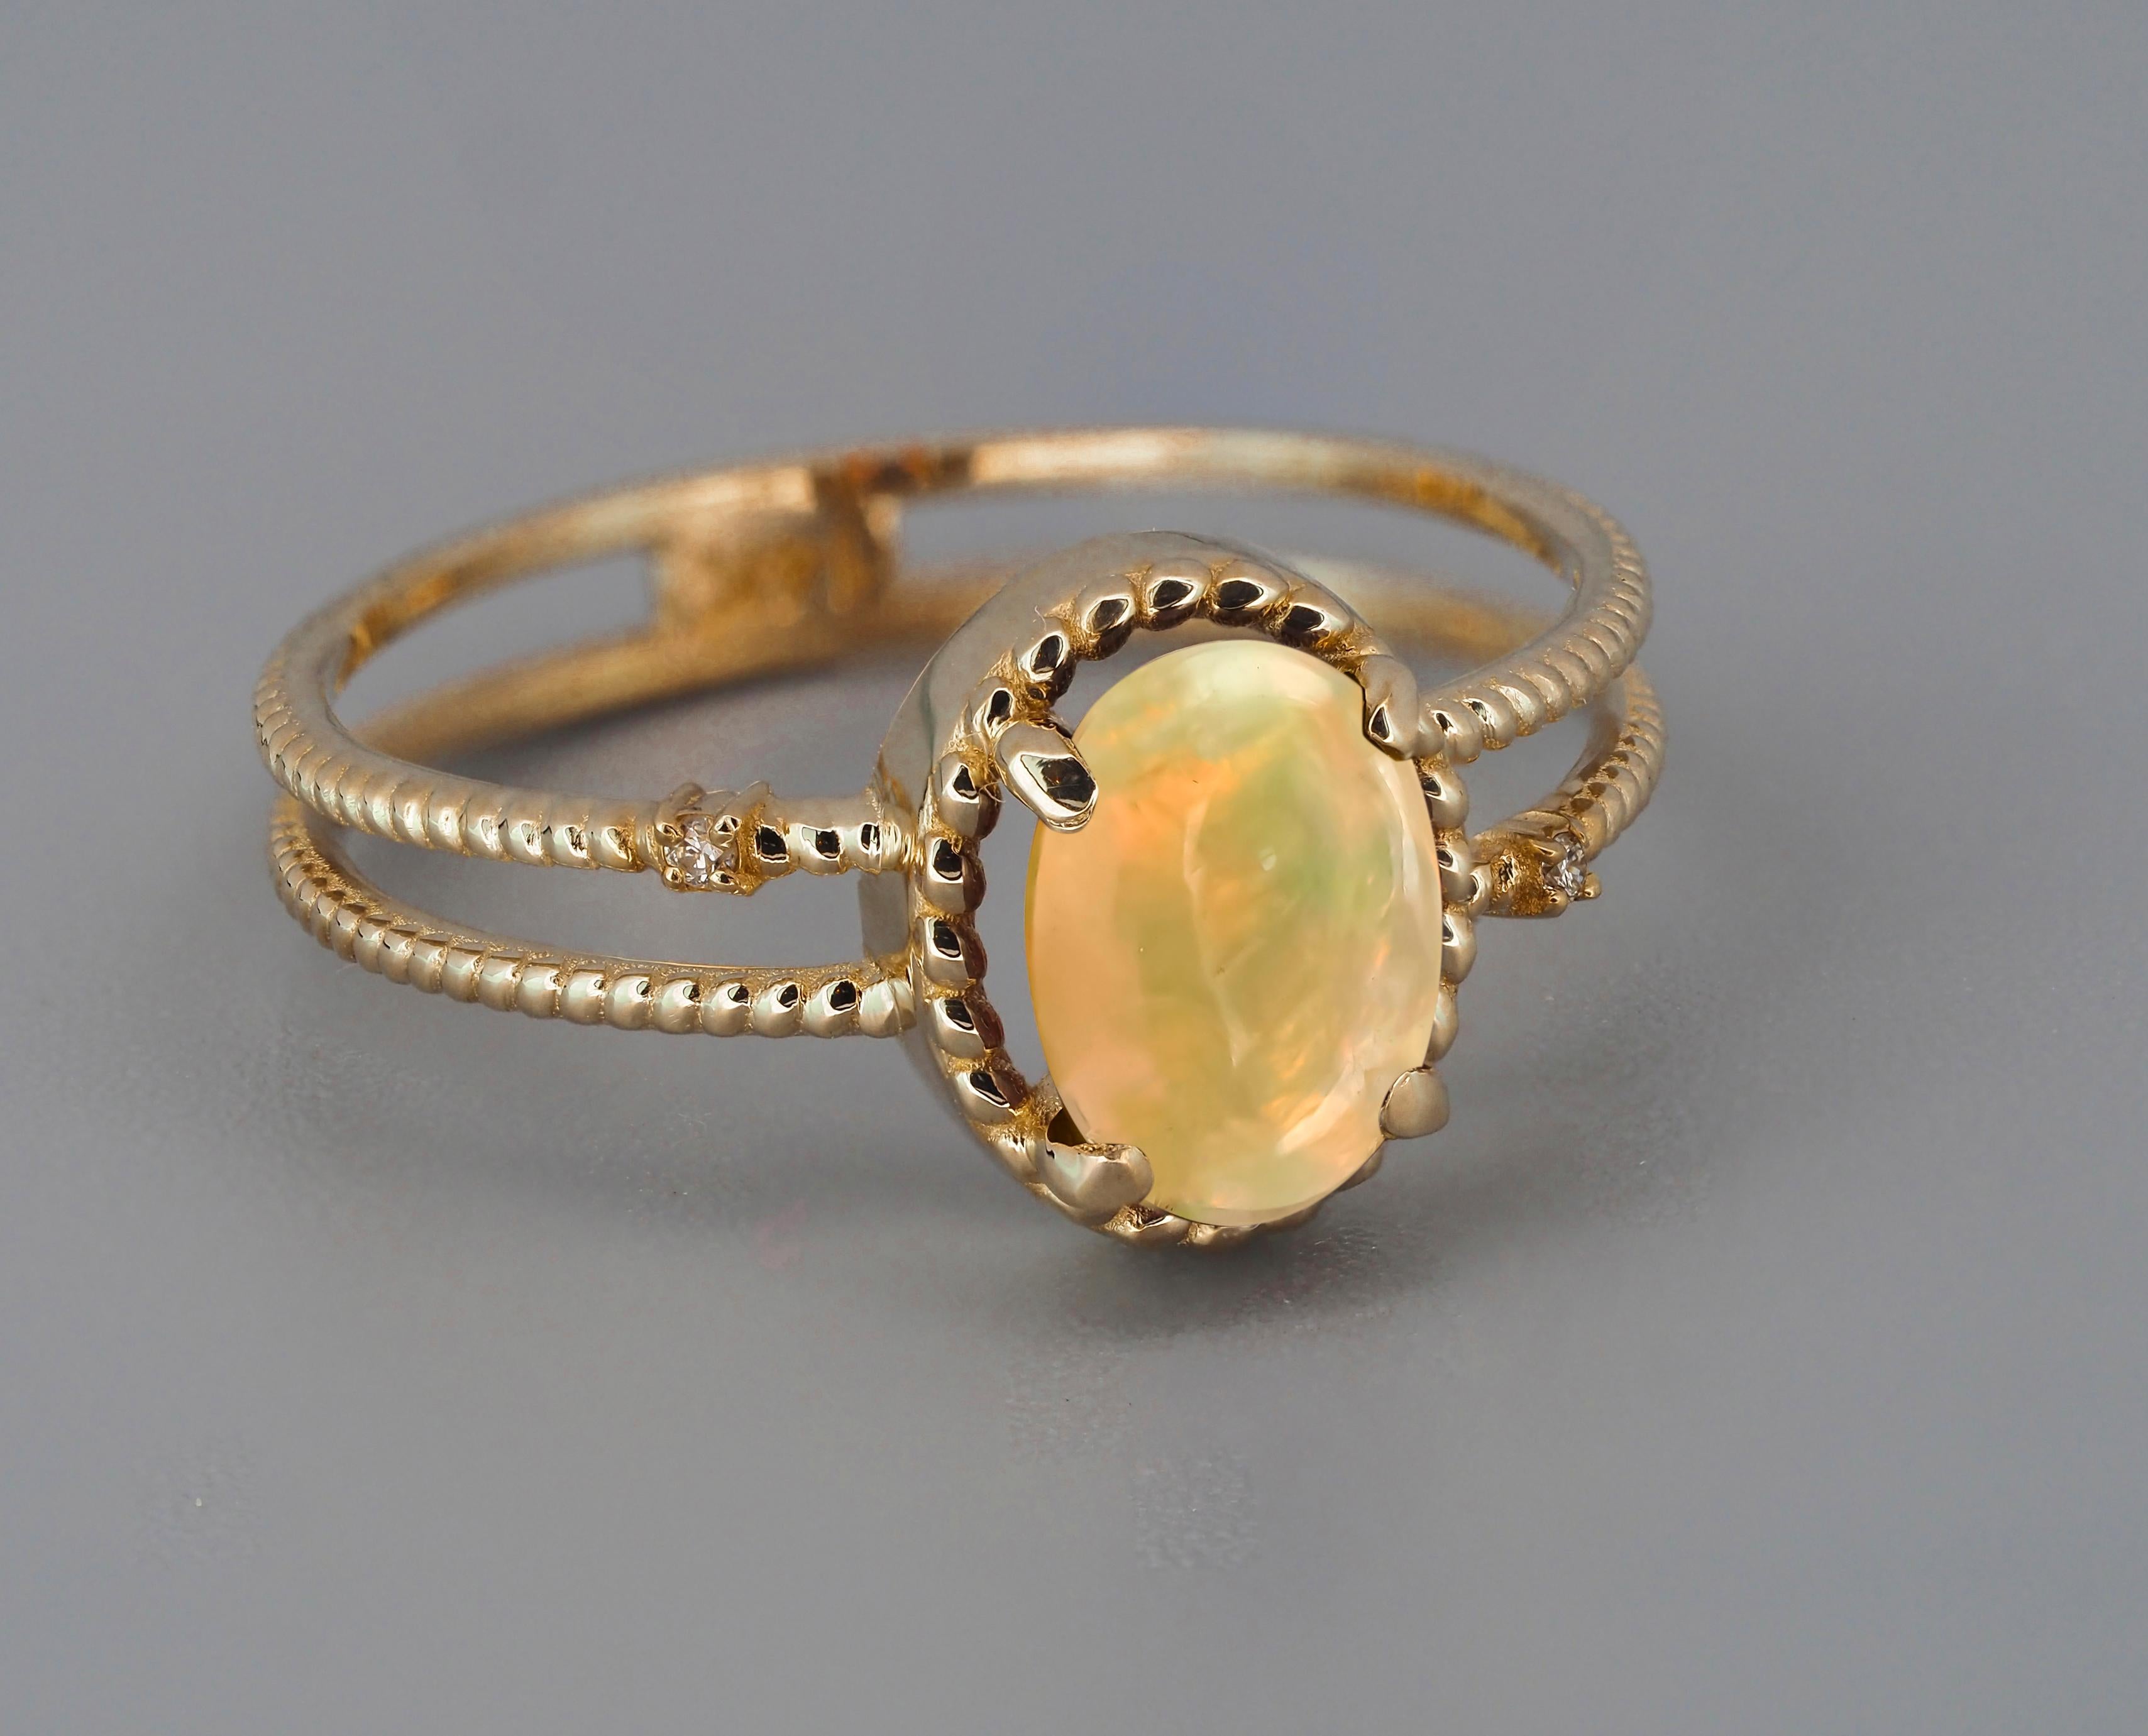 For Sale:  Cabochon Opal Ring. 14k Gold Ring with Opal. Minimalist Opal Ring 3